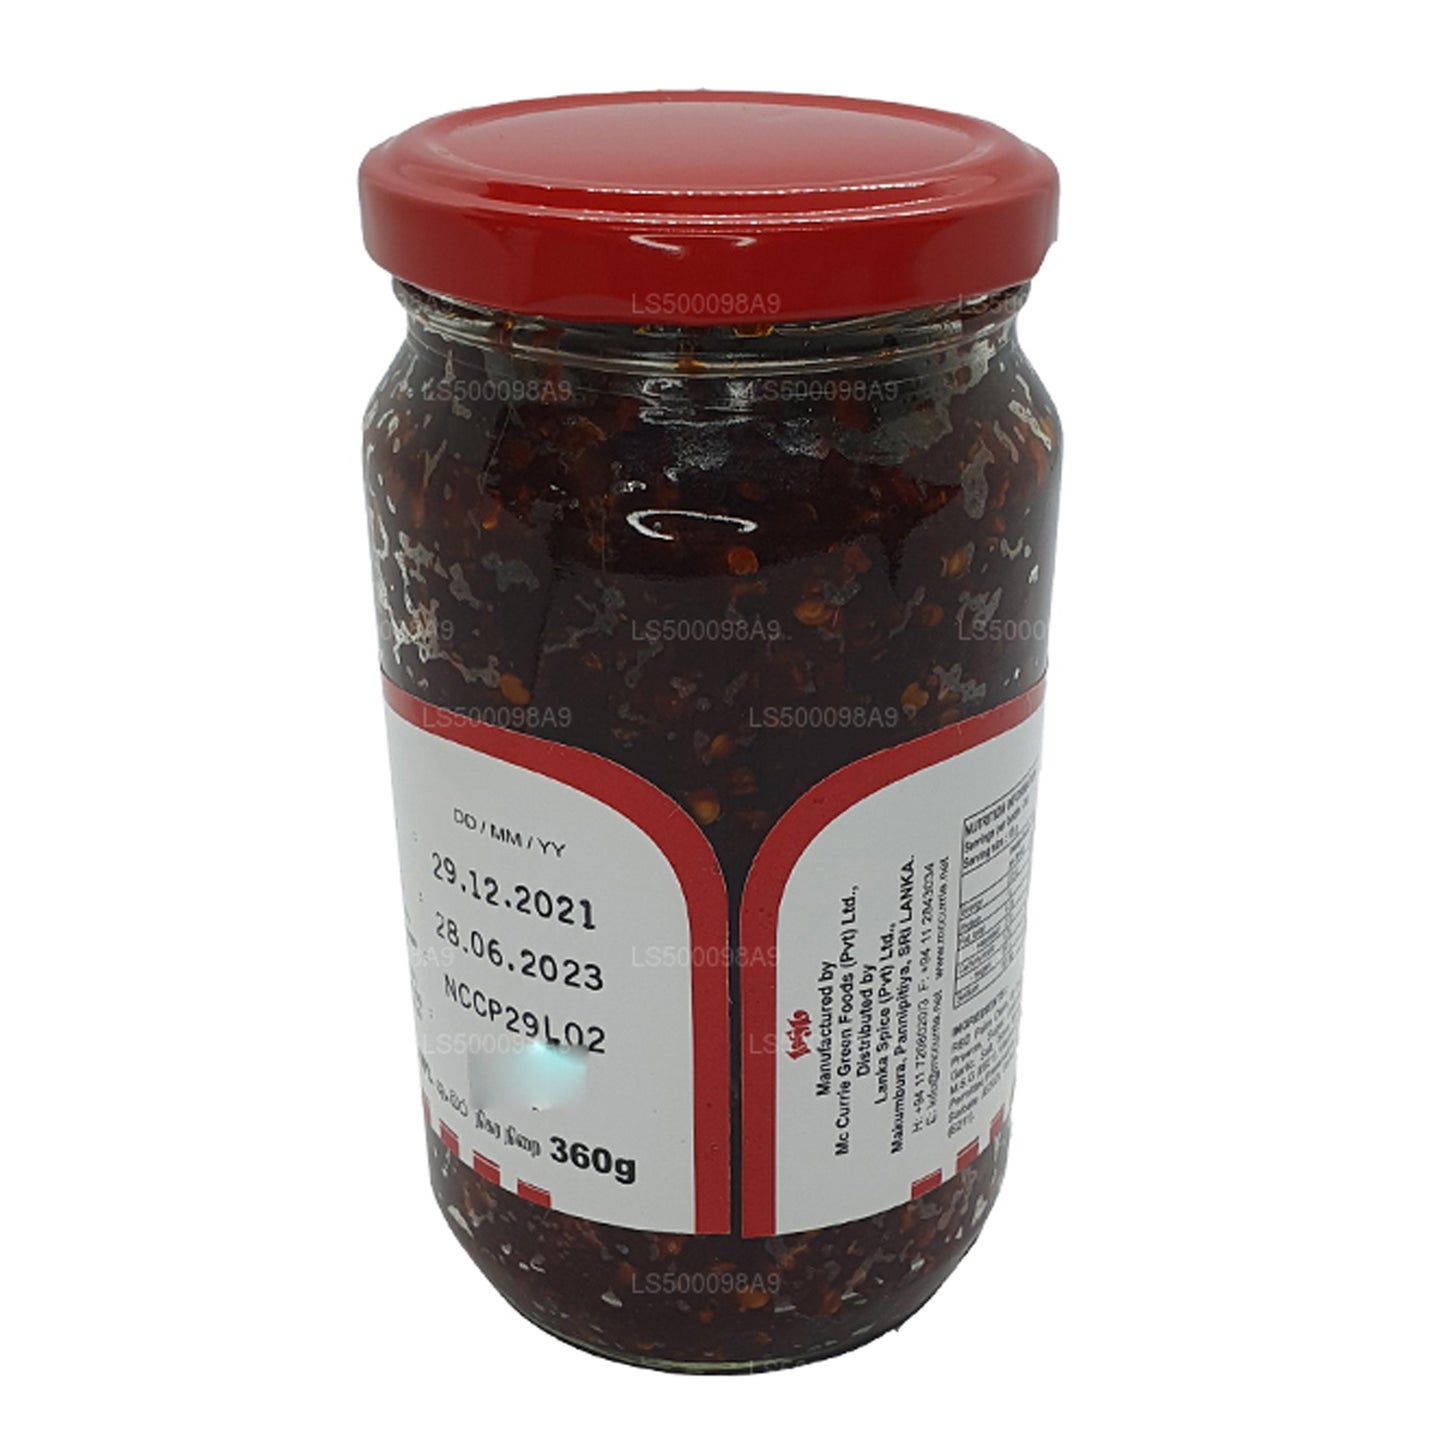 Mc Currie Chinese Chilli Paste